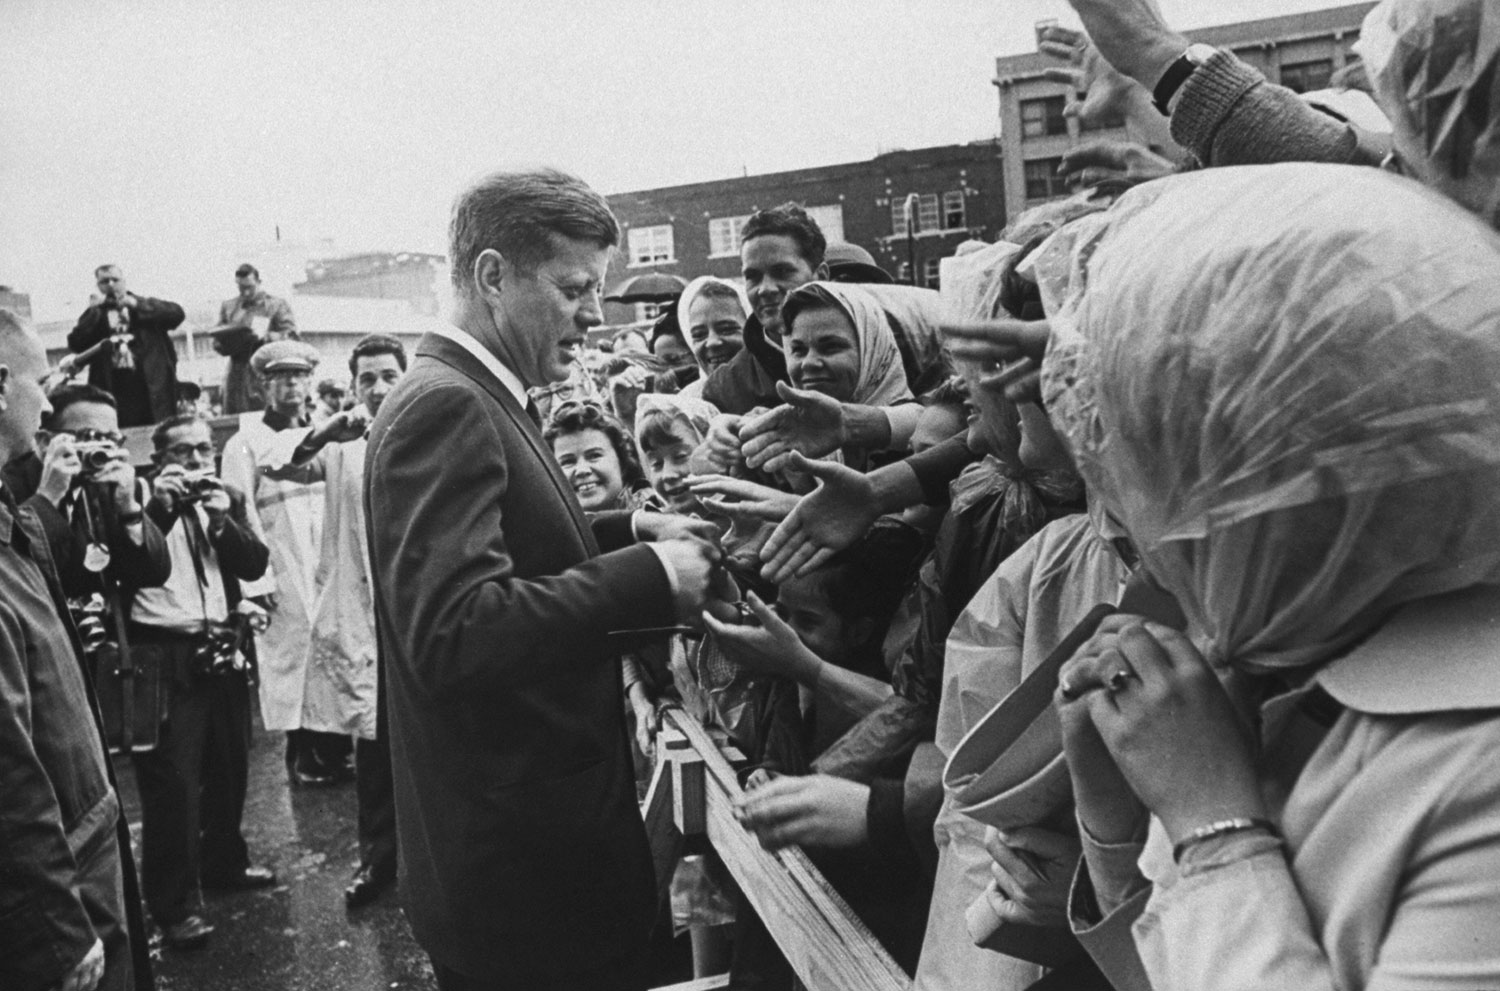 President John Kennedy greets admirers in Fort Worth, Texas, Nov. 22, 1963, shortly before flying to Dallas.